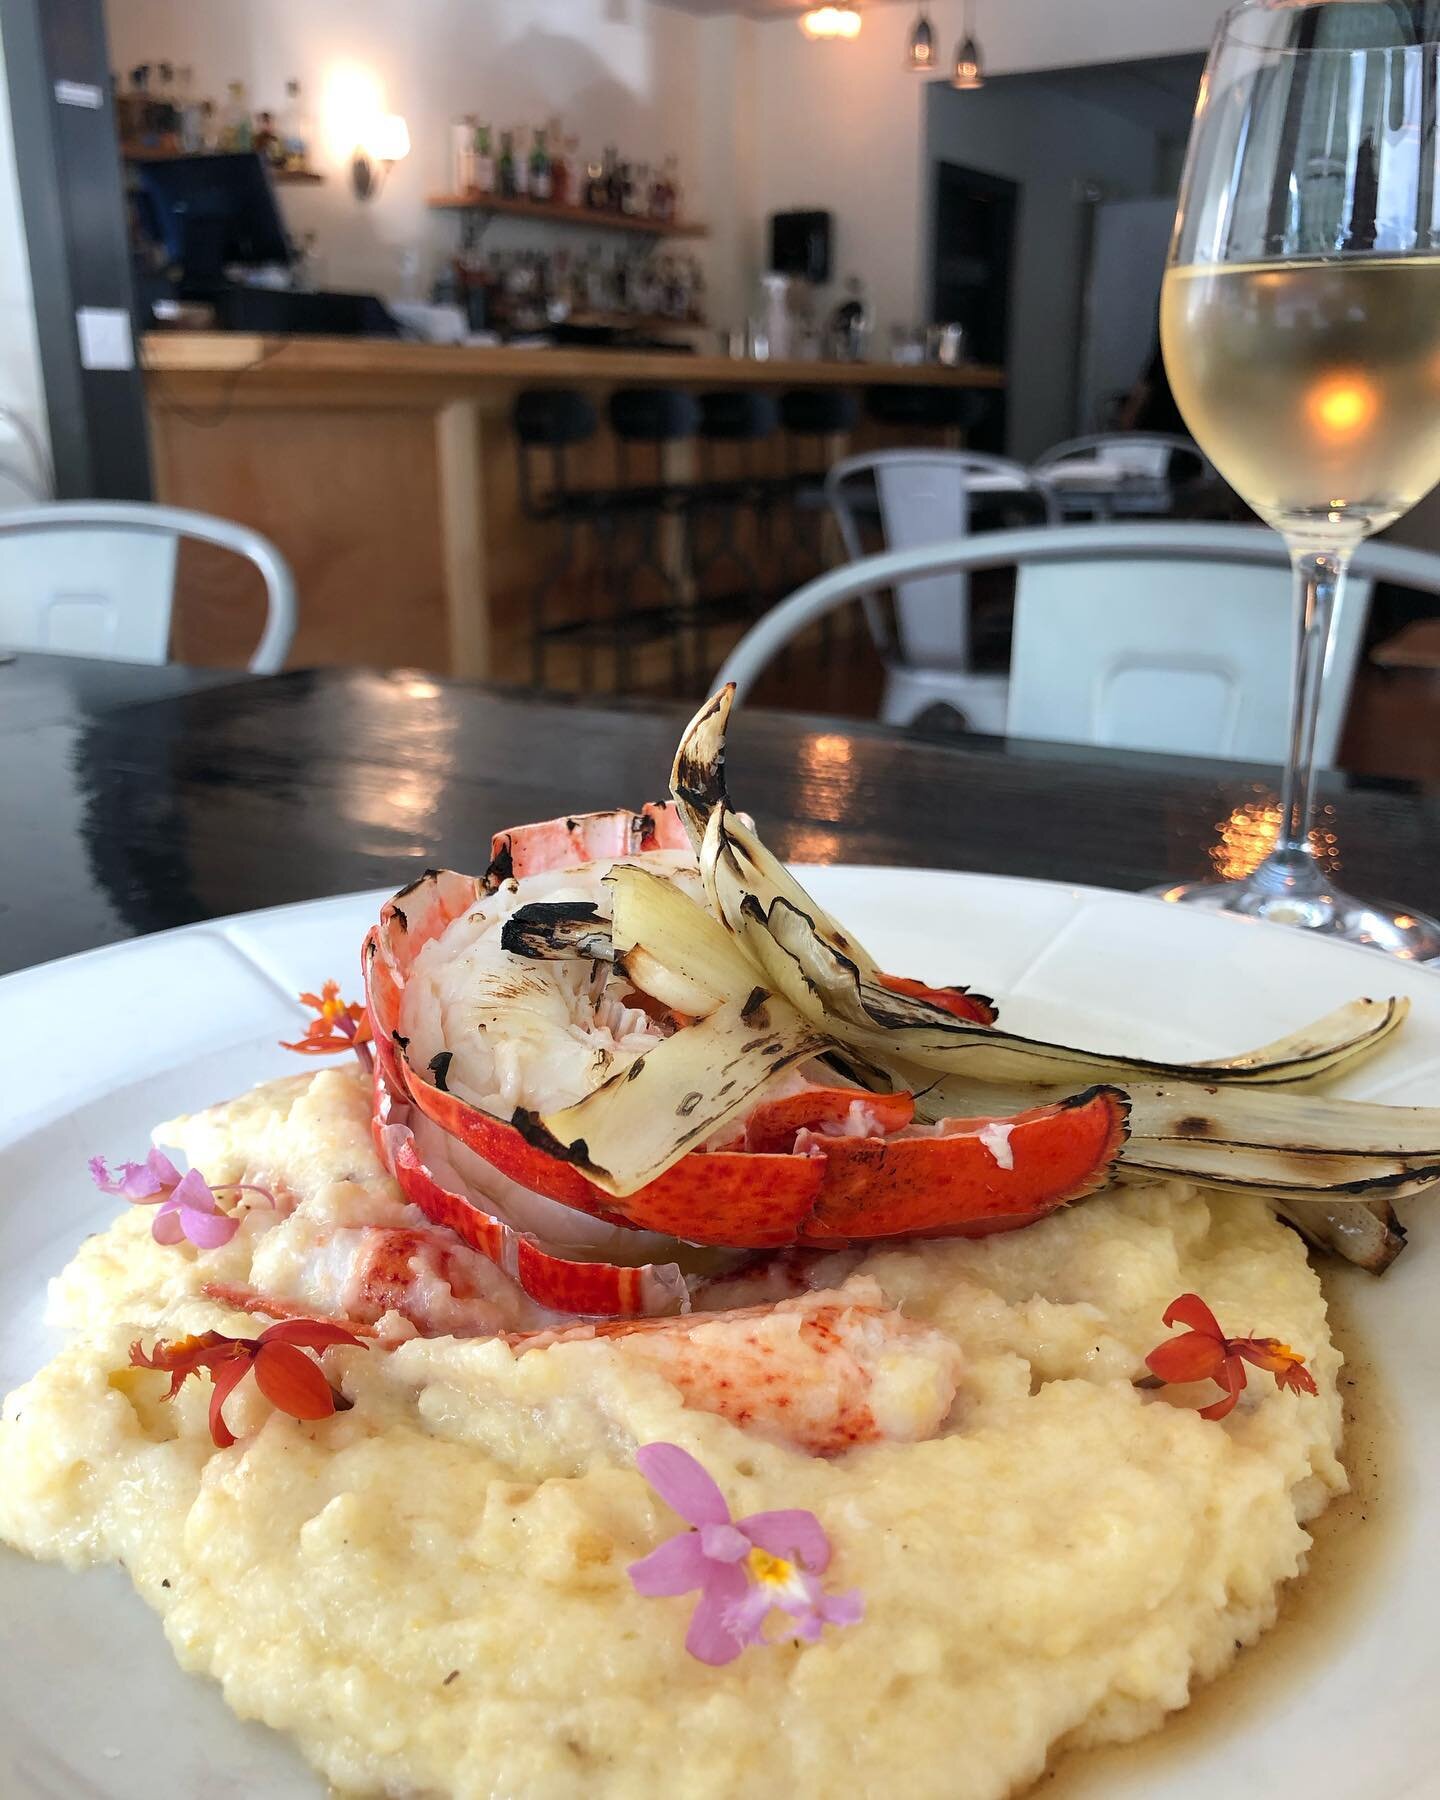 Aragosta is one of our most popular dishes and we can see why! Butter basted lobster tail wity a truffle and cheese polenta, claw and knuckle meat, grilled leek, and finished with a preserved lemon gastrique.  It pairs exceptionally well with our by-